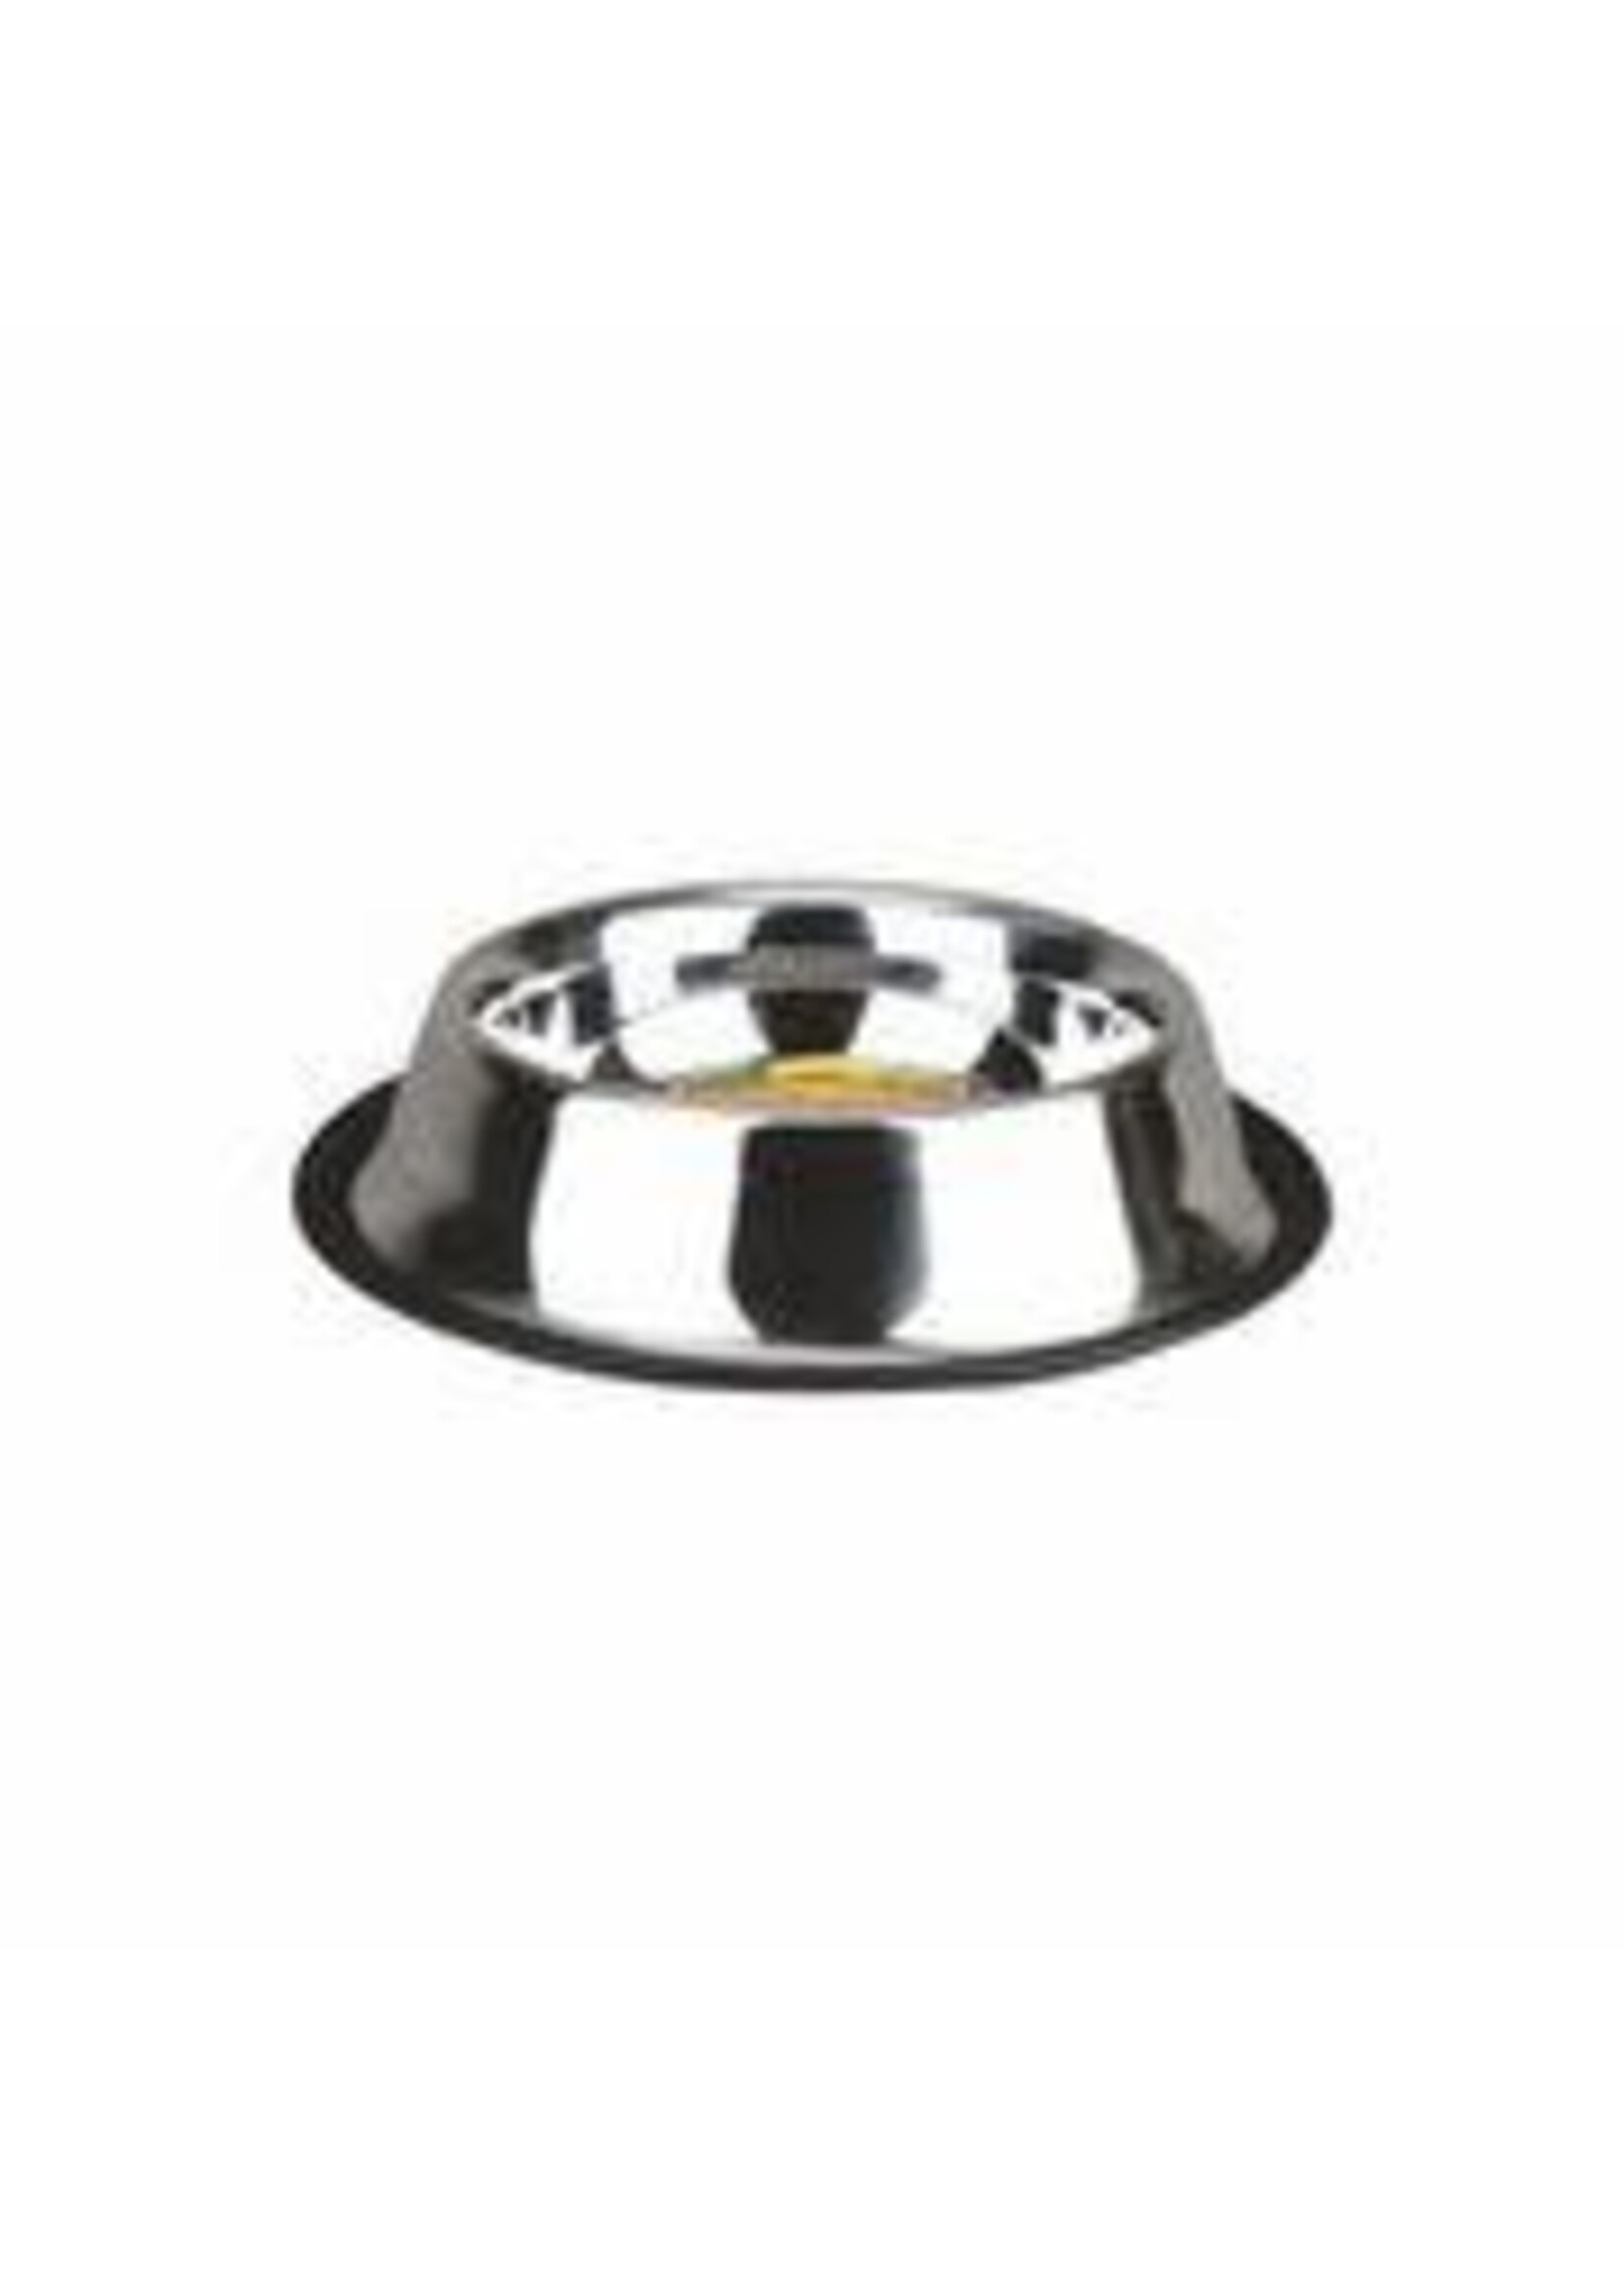 Tailfin Sports Advanced Pet Products Stainless Steel Bowl - 32 oz.